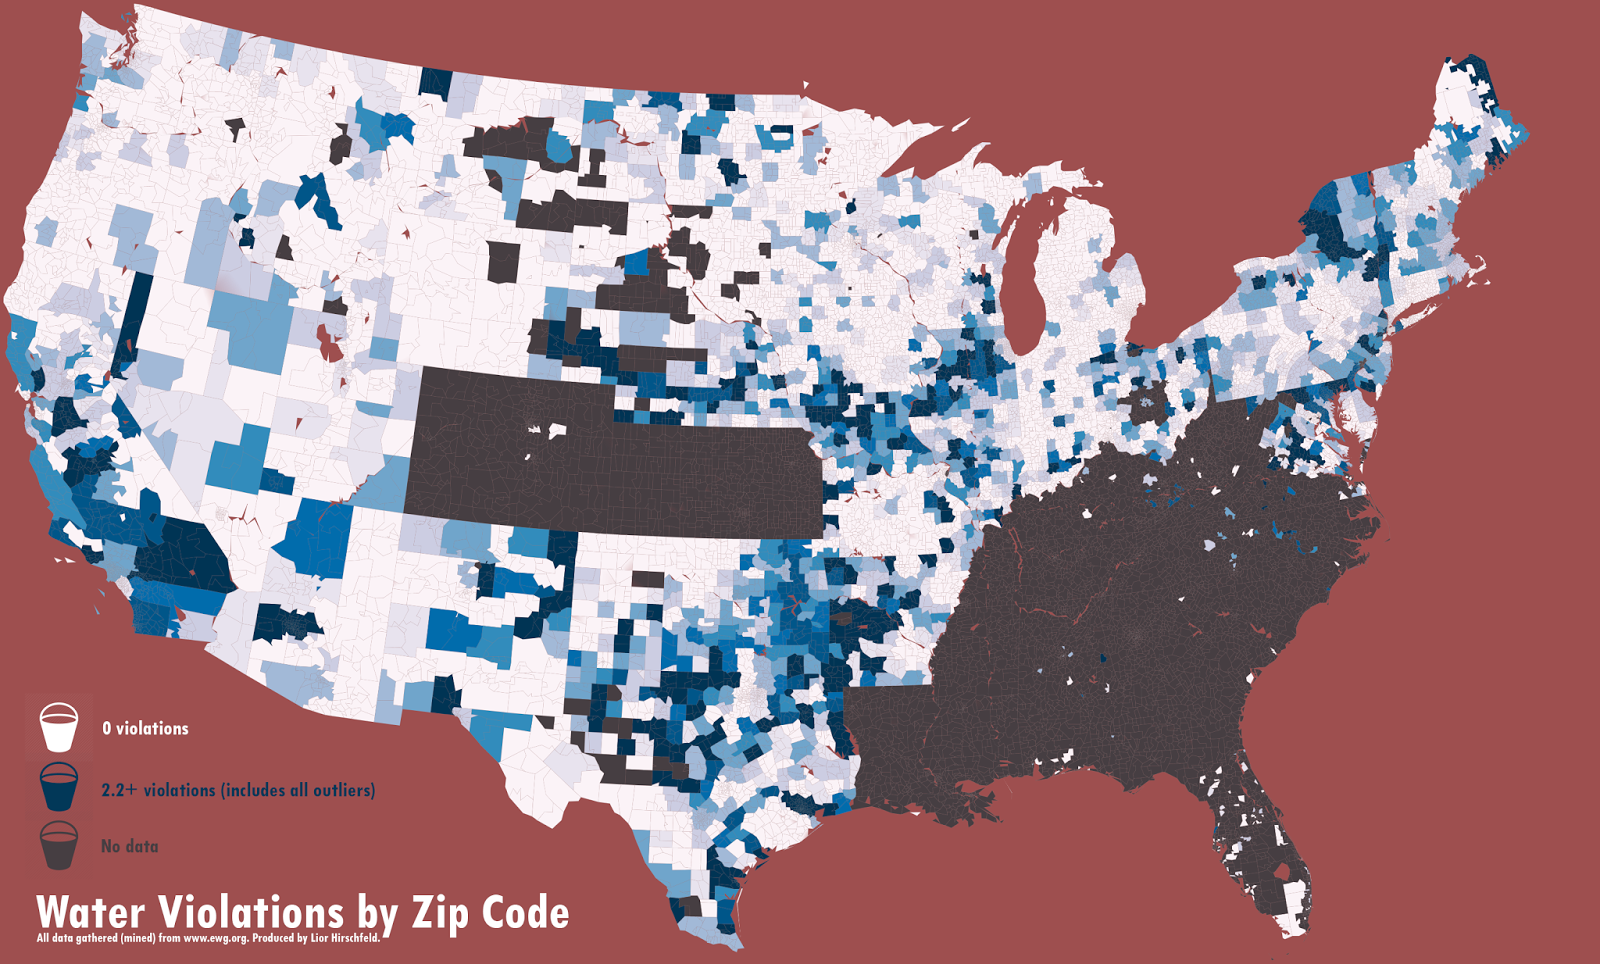 US Water Violations Since 2004 by Zip Code